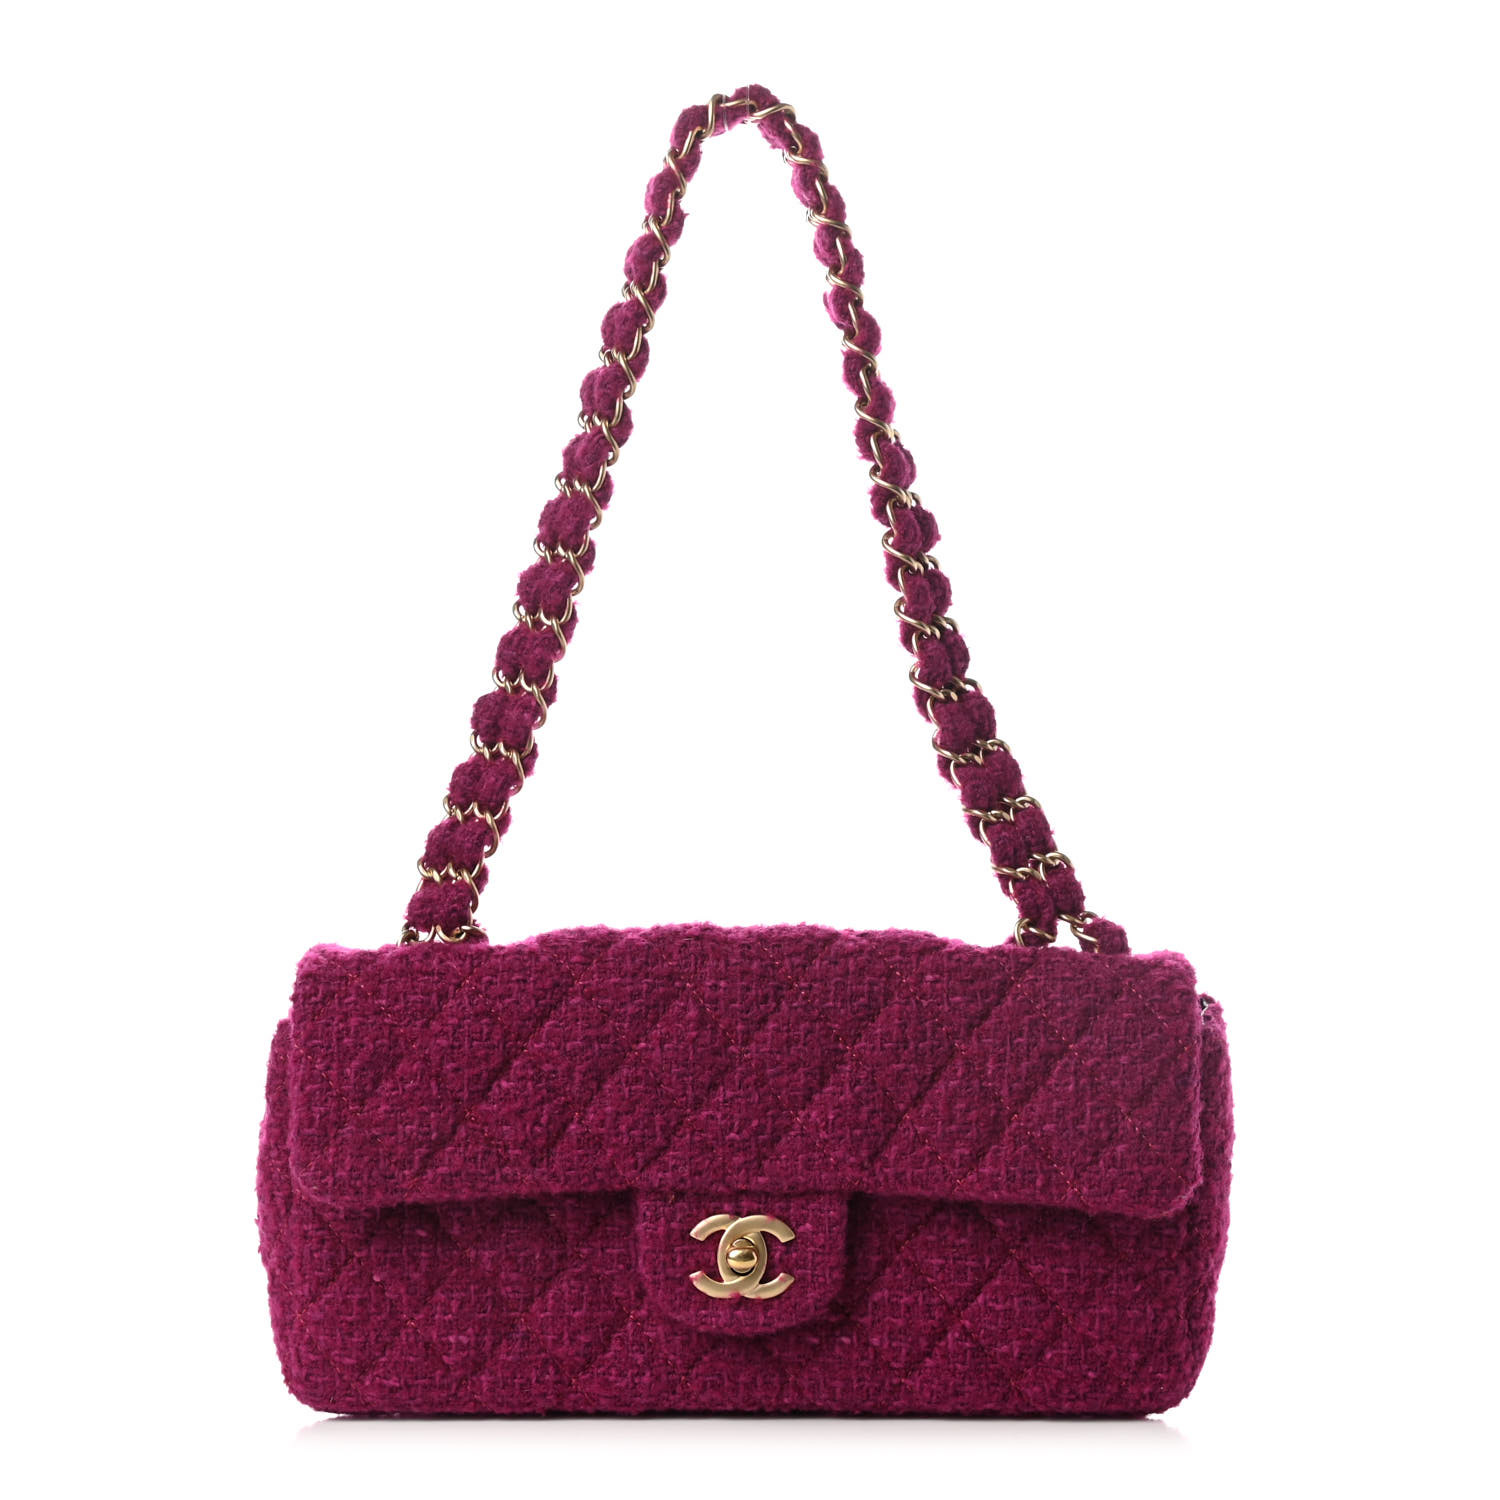 CHANEL Tweed East West Flap in the color Fuchsia by FASHIONPHILE